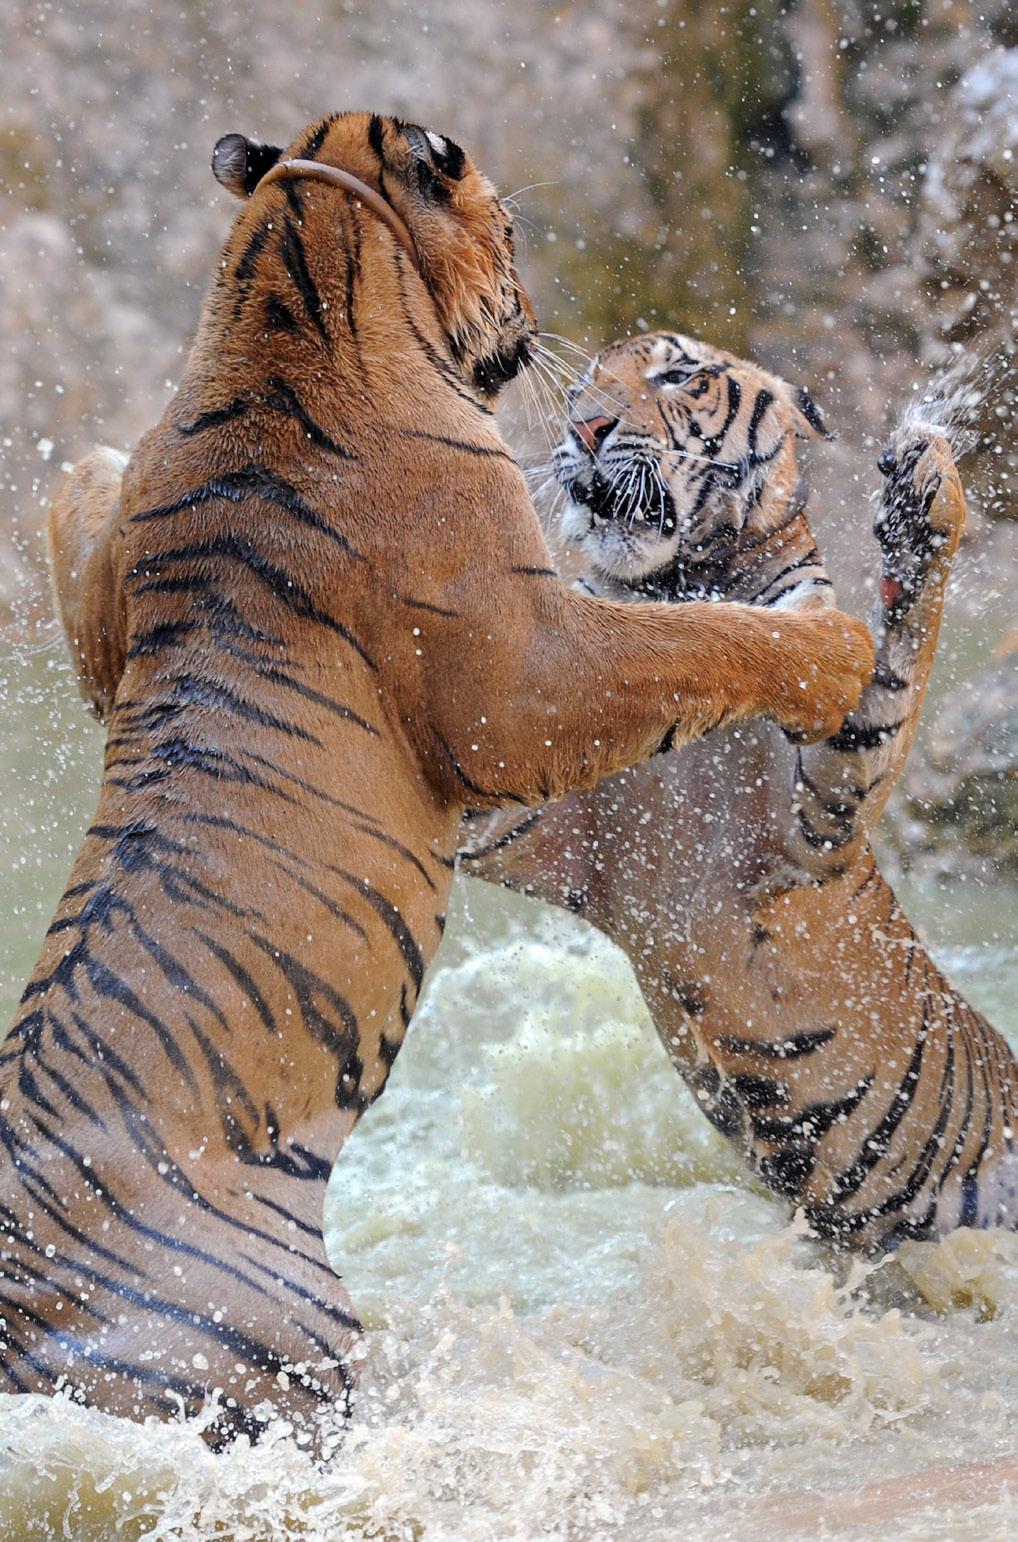 TIGERS TO BE FREED ADDITIONAL FACTS AND FIGURES ILLEGAL TRADE It is against the law to exchange or sell tigers.